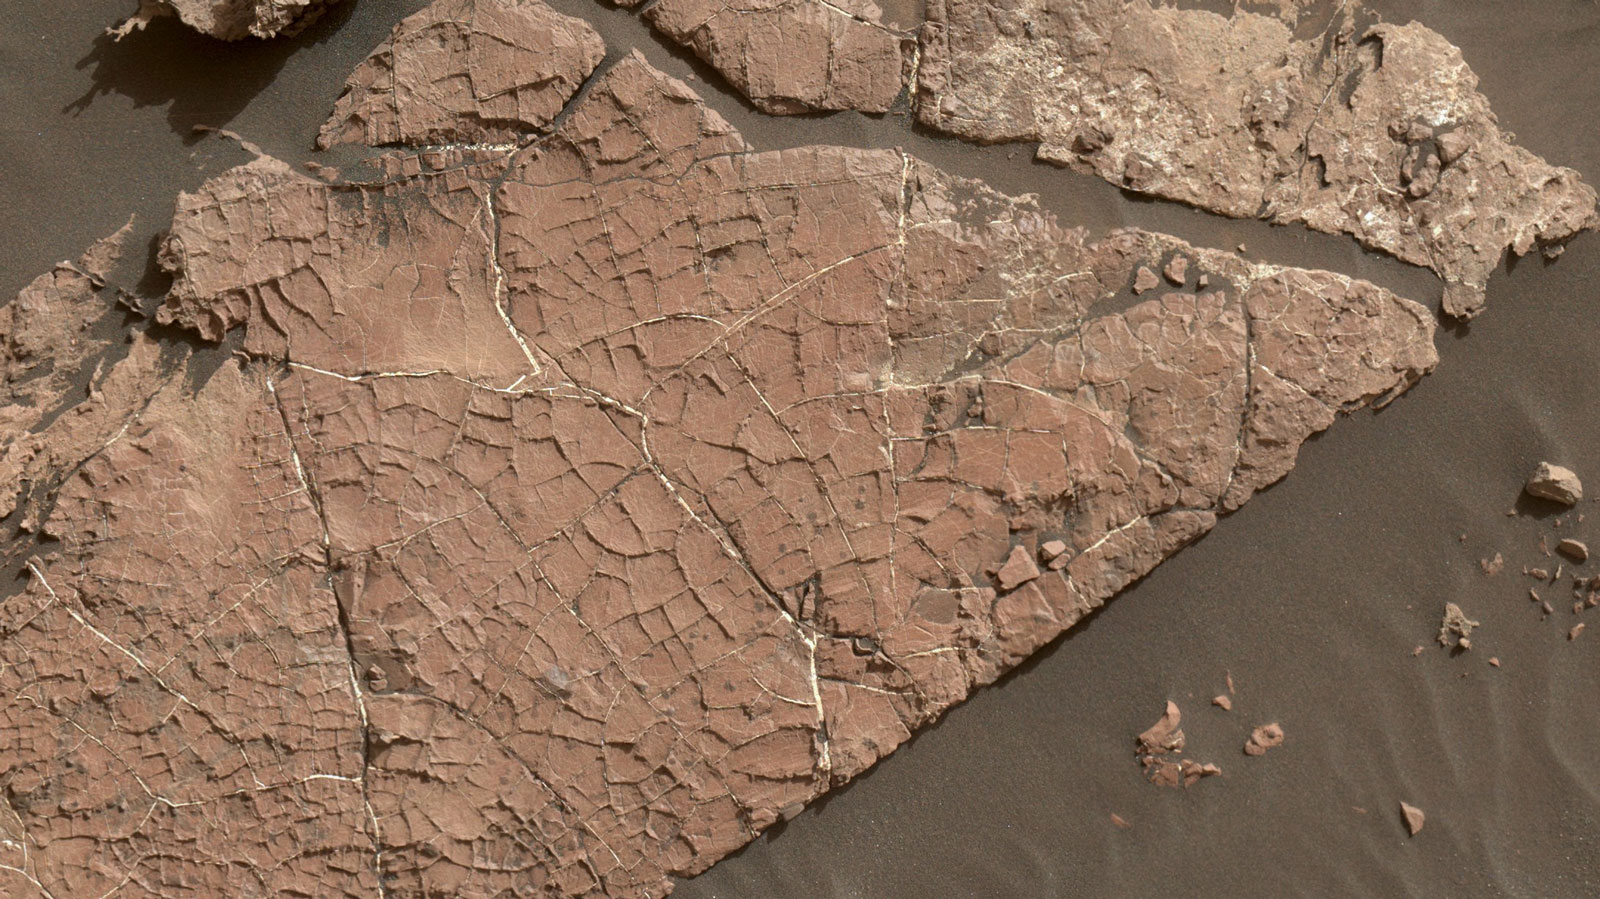 a photo taken by the curious rover shows a dusty red slab of rock with a network of cracks in it, looking like a dried up riverbed